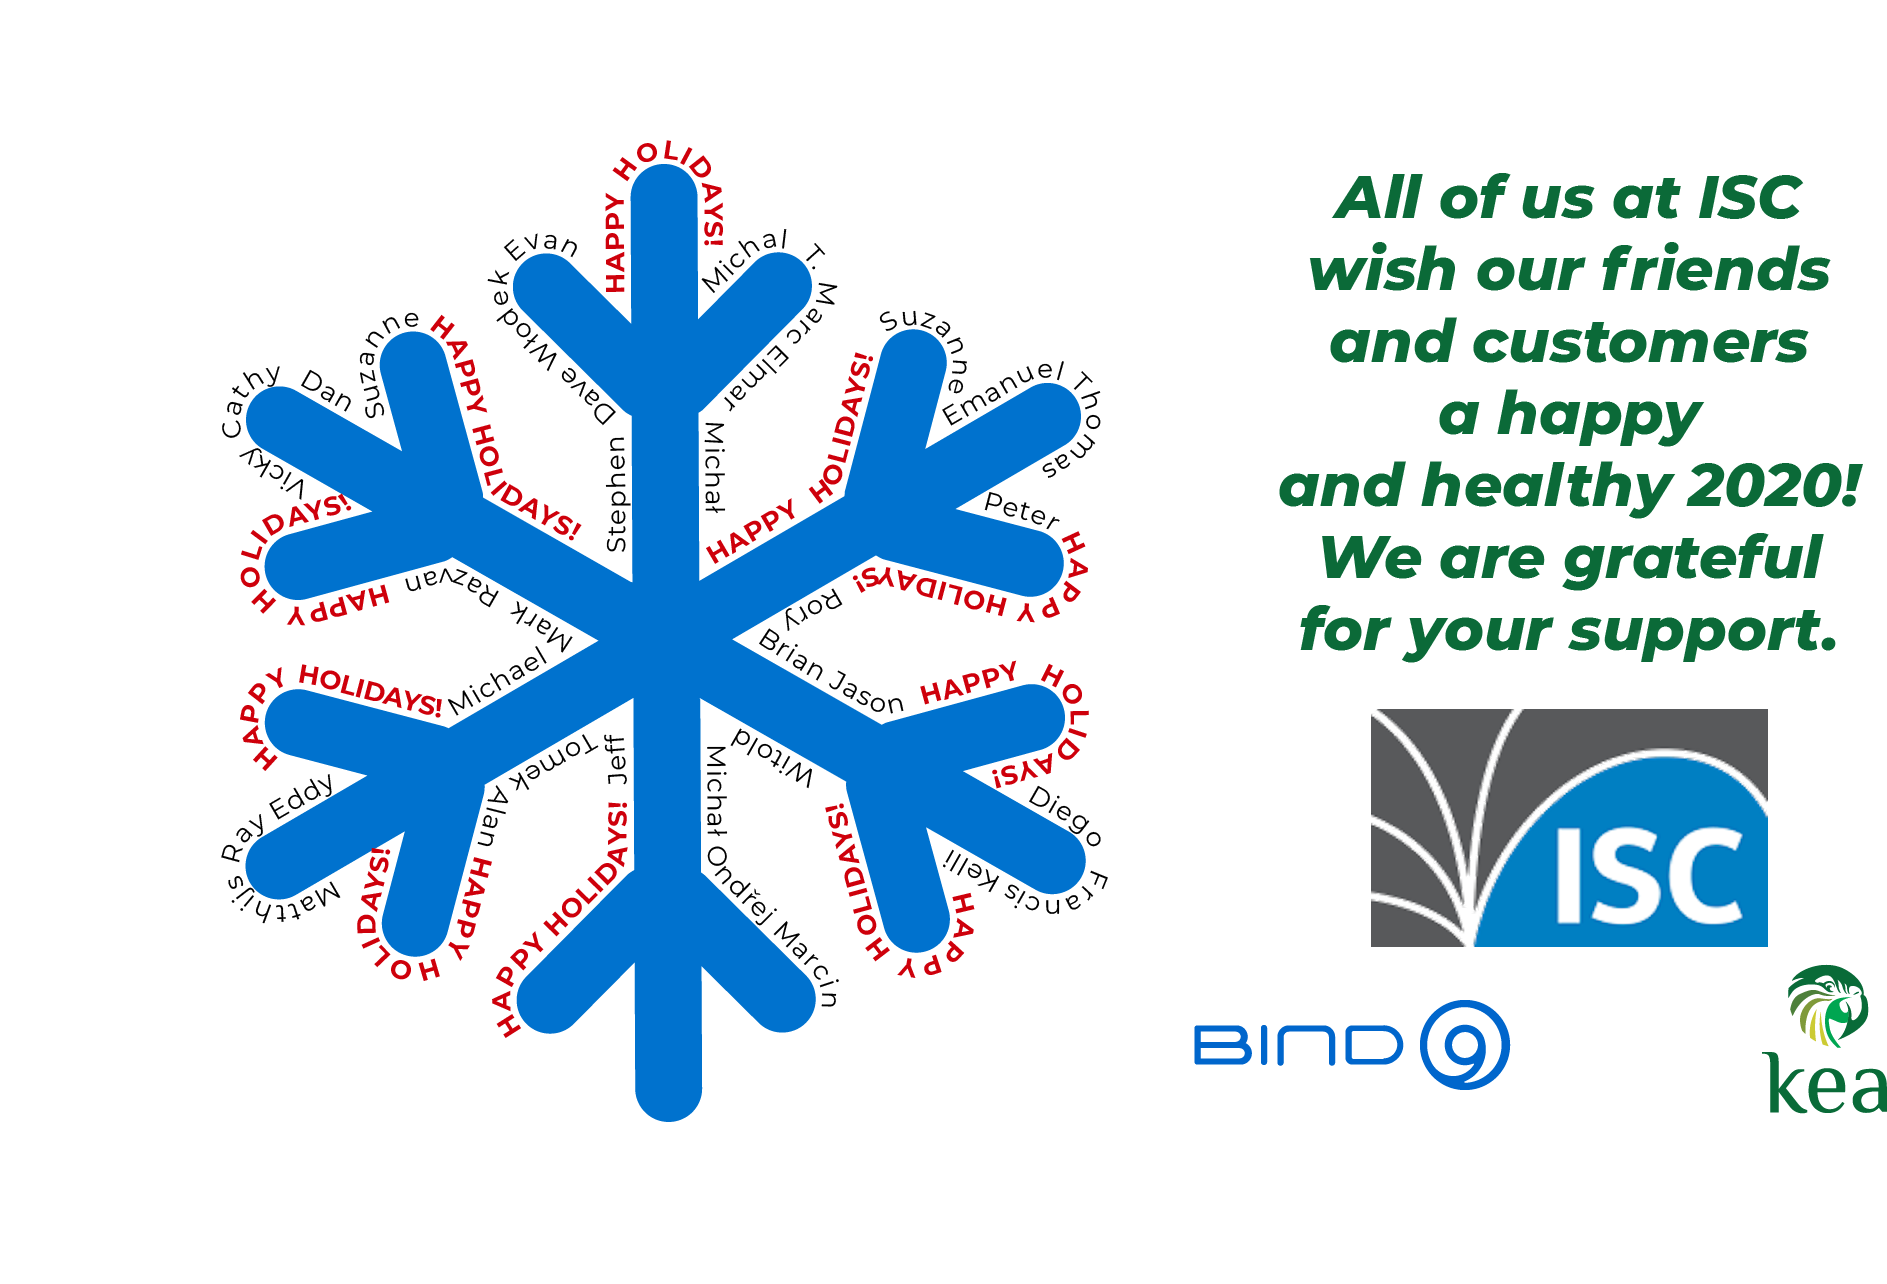 ISC's 2019 holiday card, which reads 'All of us at ISC wish our friends and customers a happy and healthy 2020! We are grateful for your support,' accompanied by a graphic of a blue snowflake around the outline of which are listed the names of all of ISC's staff members